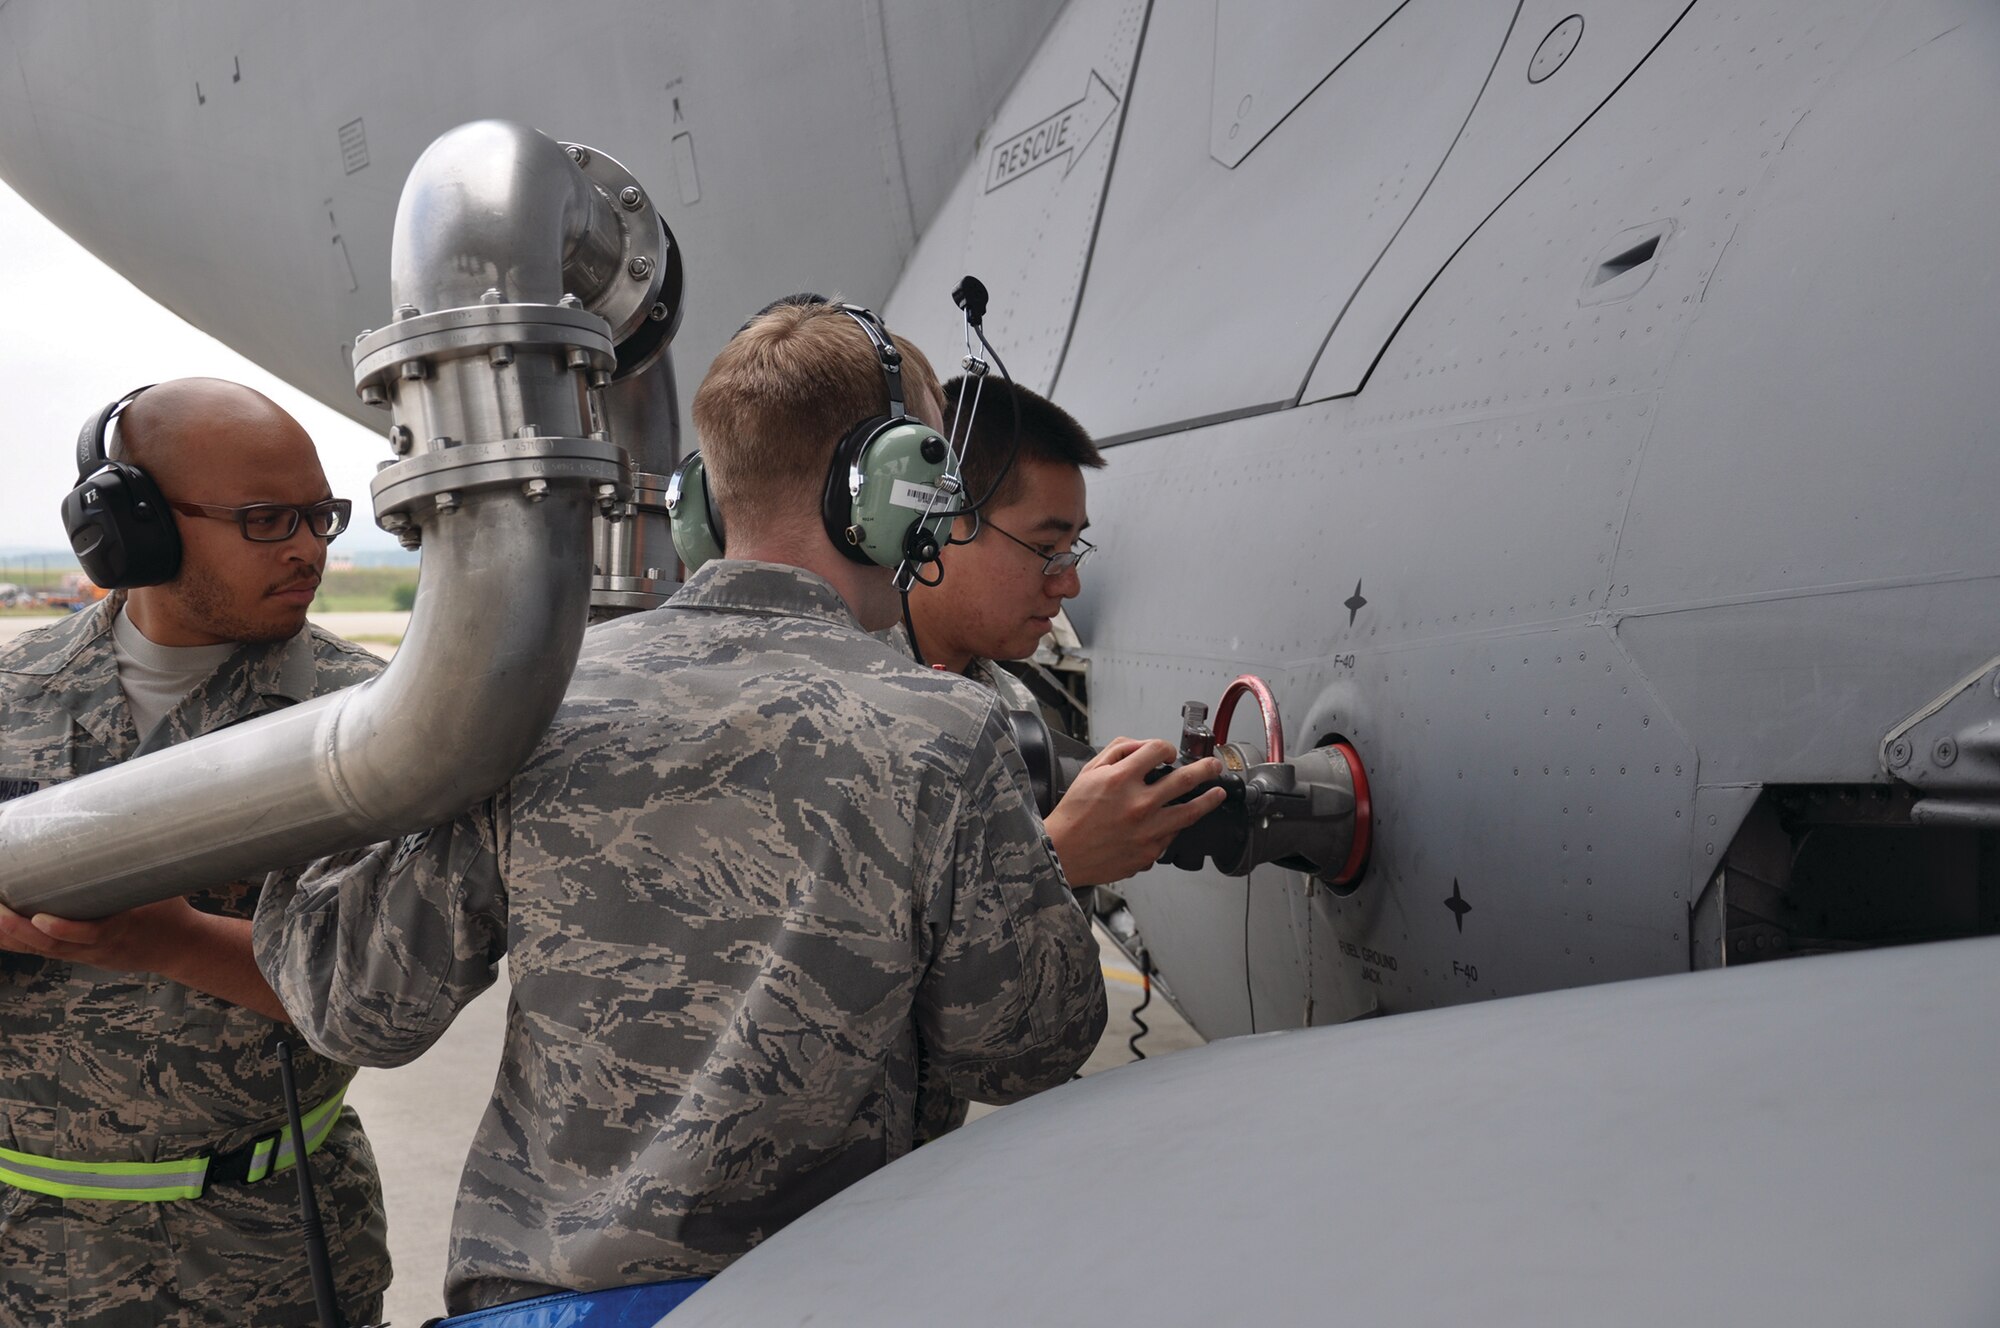 RAMSTEIN AIR BASE, Germany - Staff Sgts. Korey Smithward (far left), and Thao Phan (far right), 445th Aircraft Maintenance Squadron fuels specialists, assist Senior Airman Brenton Reese, 721st Aircraft Maintenance Squadron fuels specialist, in refueling a C-17 Globemaster III July 10, 2014. The 445 AMXS sent 20 maintainers to Germany to serve annual tour time July 7-21. (U.S. Air Force photo/Capt. Elizabeth Caraway)